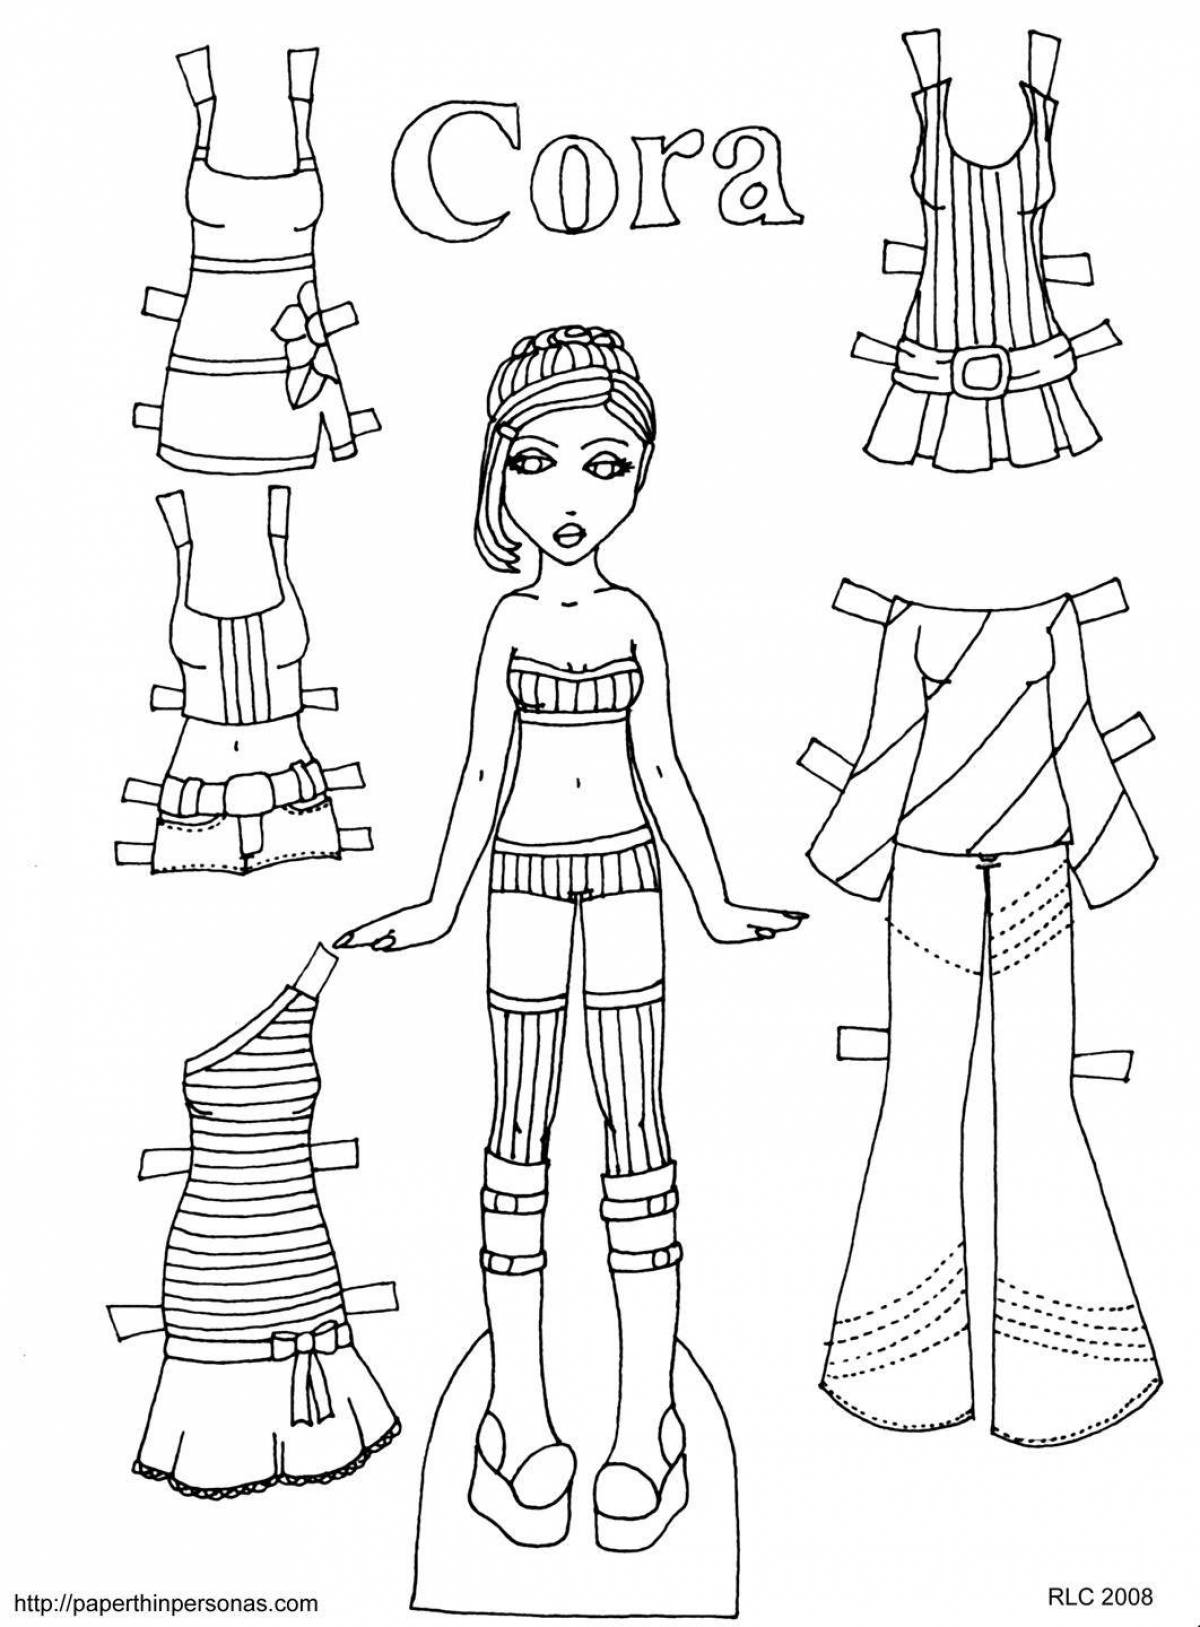 Fairytale dress up coloring page